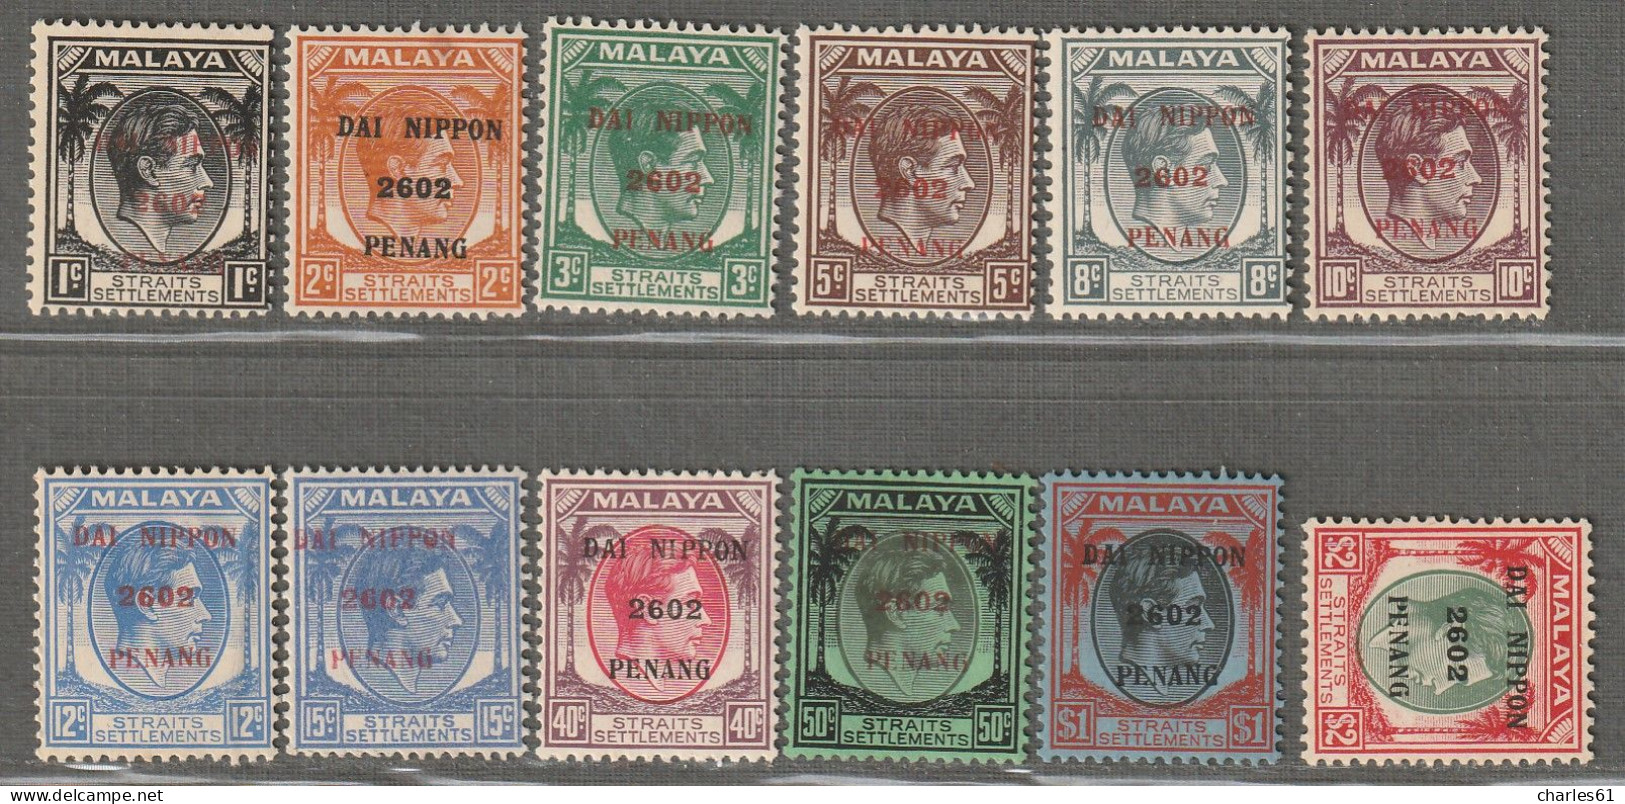 MALAYSIA - PENANG : Occupation Japonaise - N°1/12 **+* (1942) "Dai Nippon 2602 Penang" - Occupazione Giapponese